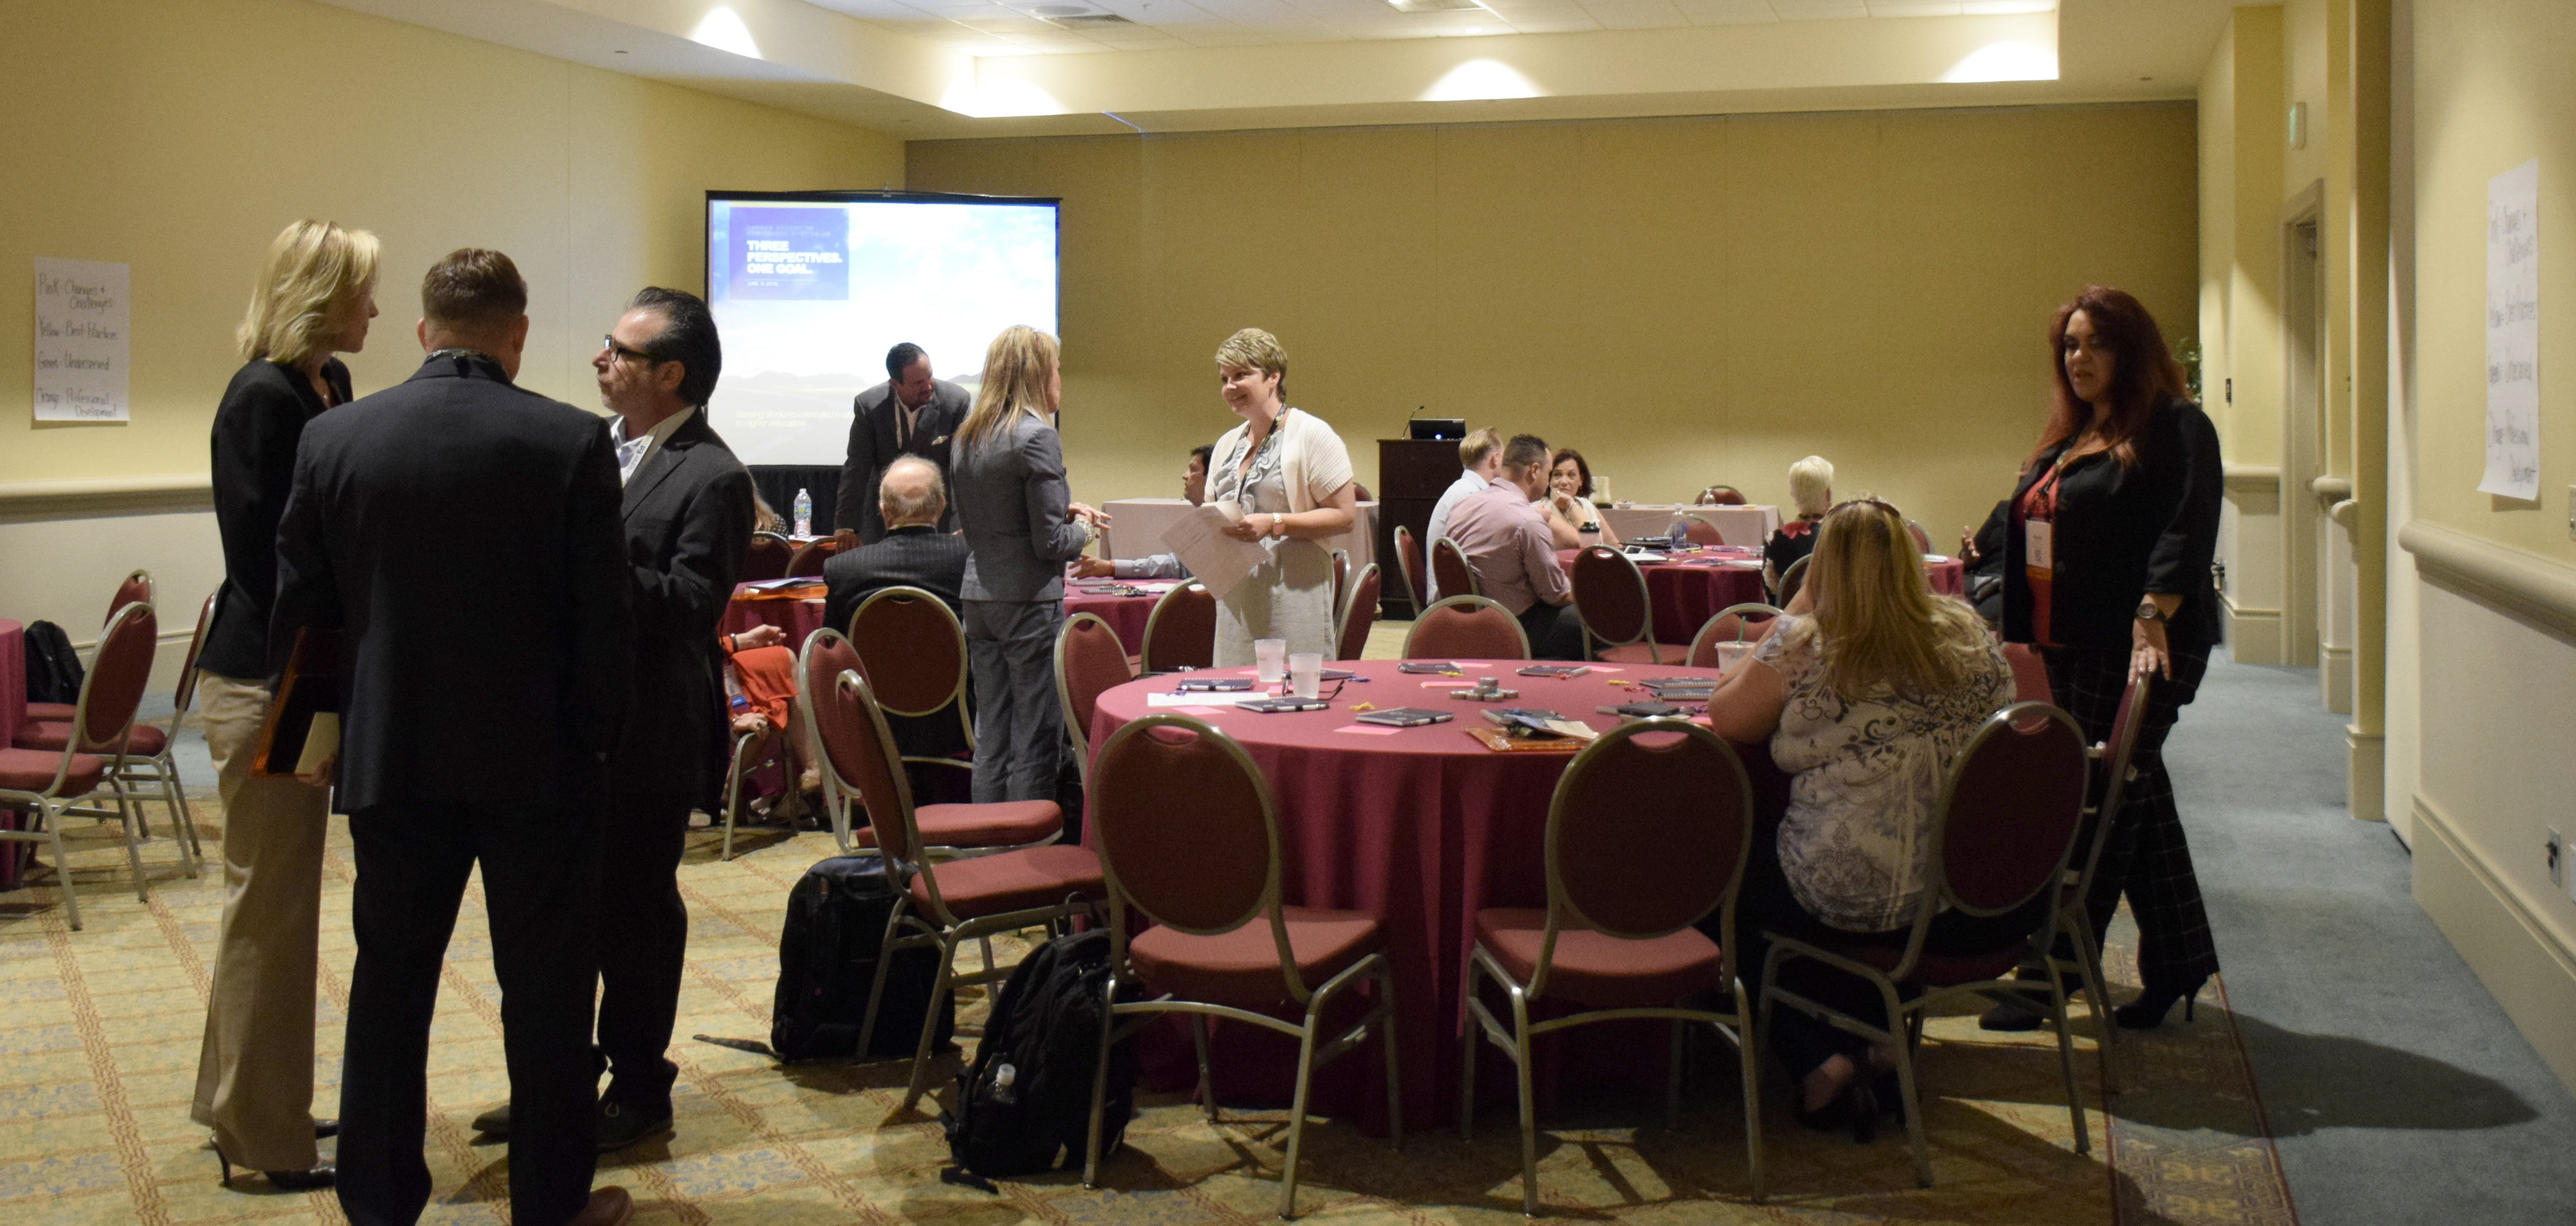 Career Education Admission Symposium Reveals New Truths and Exciting Direction for the Profession